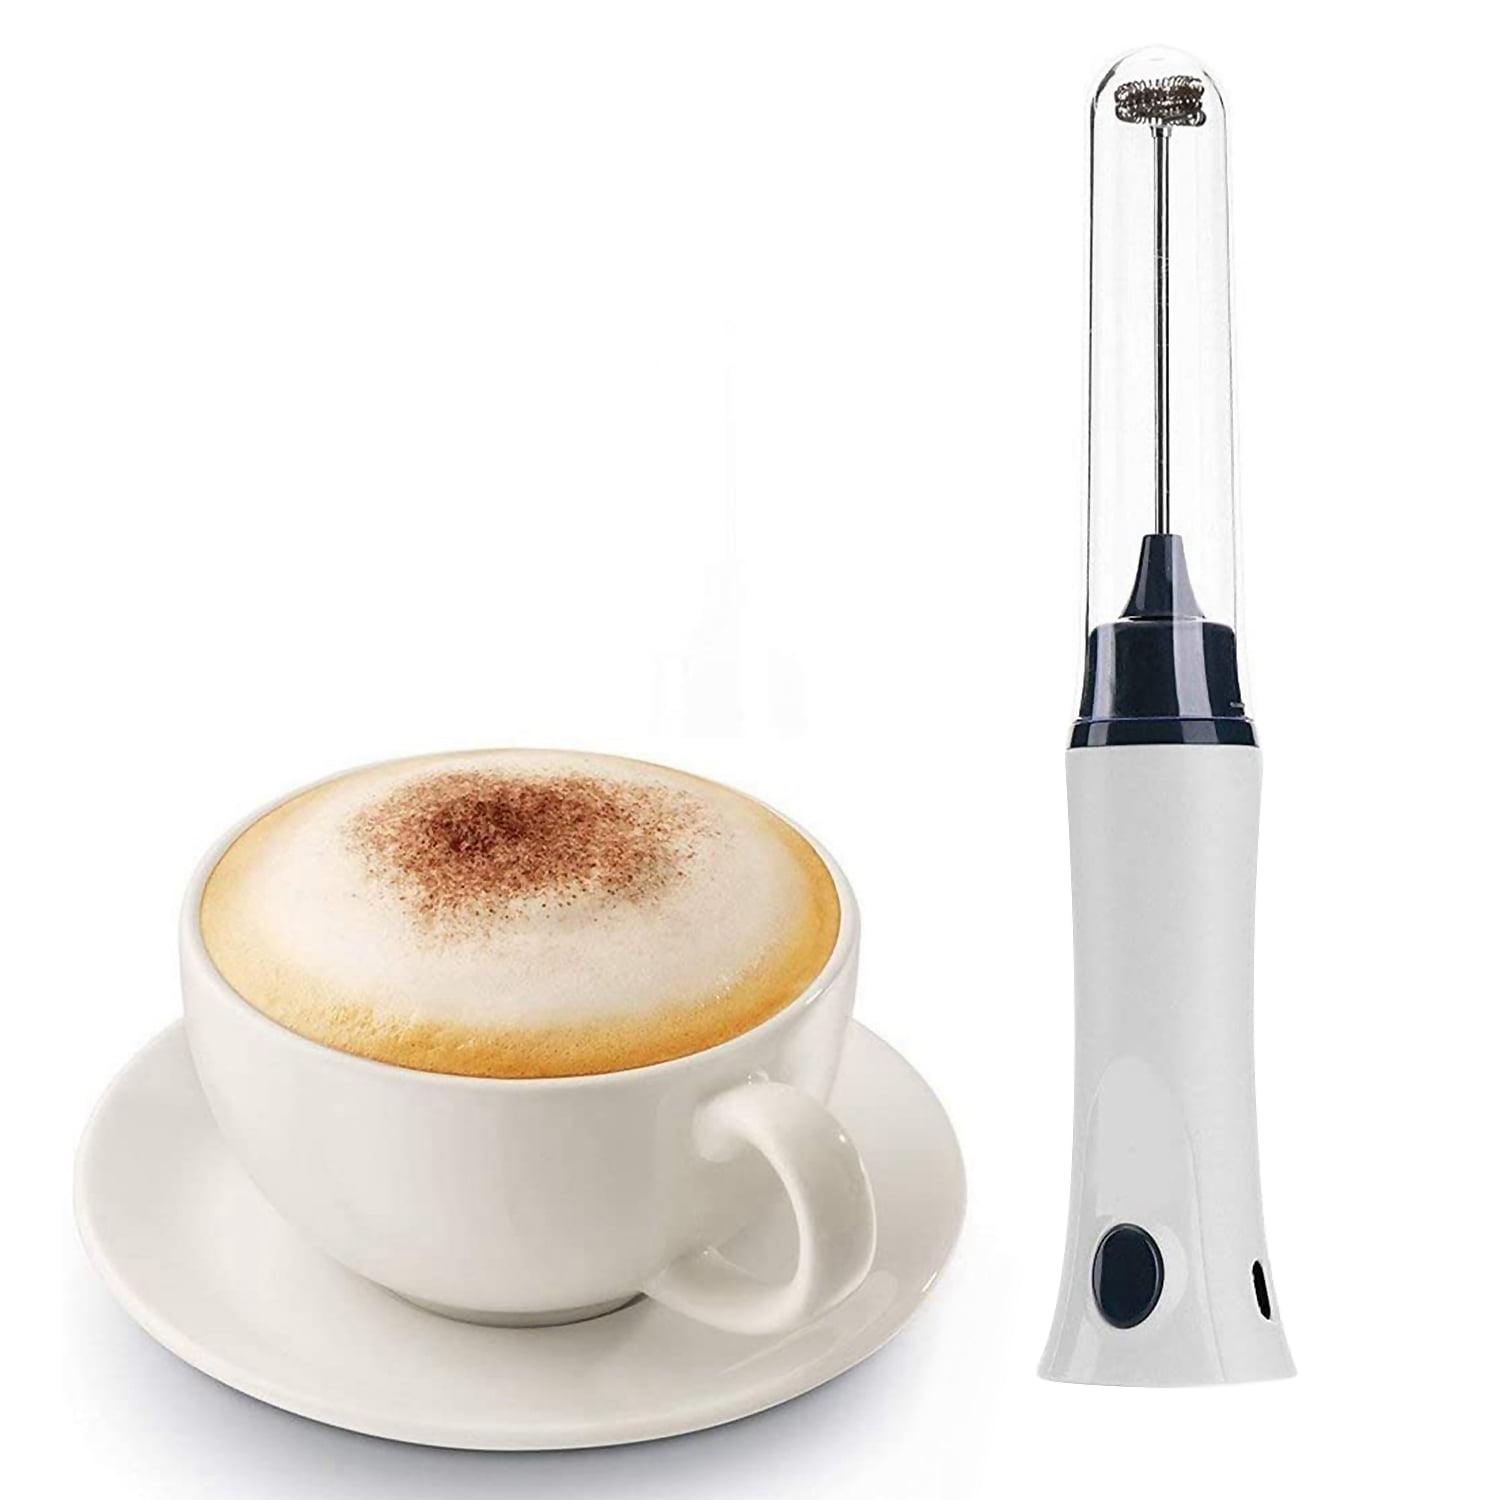 Promotion! Velocity Stainless Steel Battery Operated Electric Milk Frother Egg Beater Kitchen Drink Foamer Whisk Mixer Stirrer Coffee Creamer Whisk